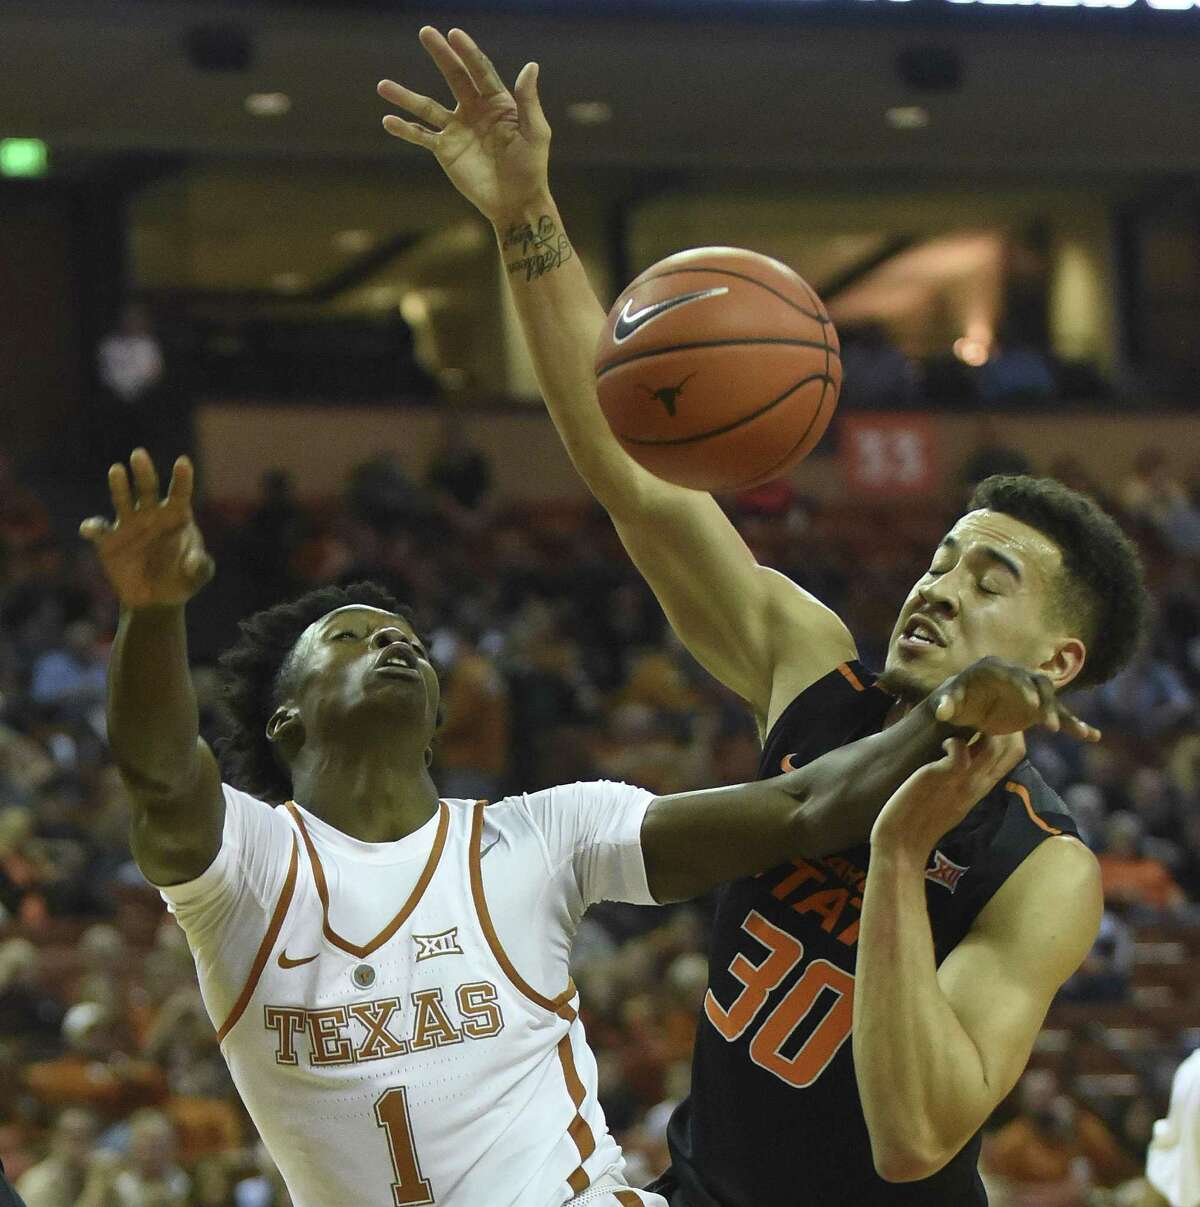 Andrew Jones (1) of Texax and Jeffrey Carroll (30) of Oklahoma State battle for a loose ball during Big 12 action in Austin on Wednesday, Jan. 4, 2017.